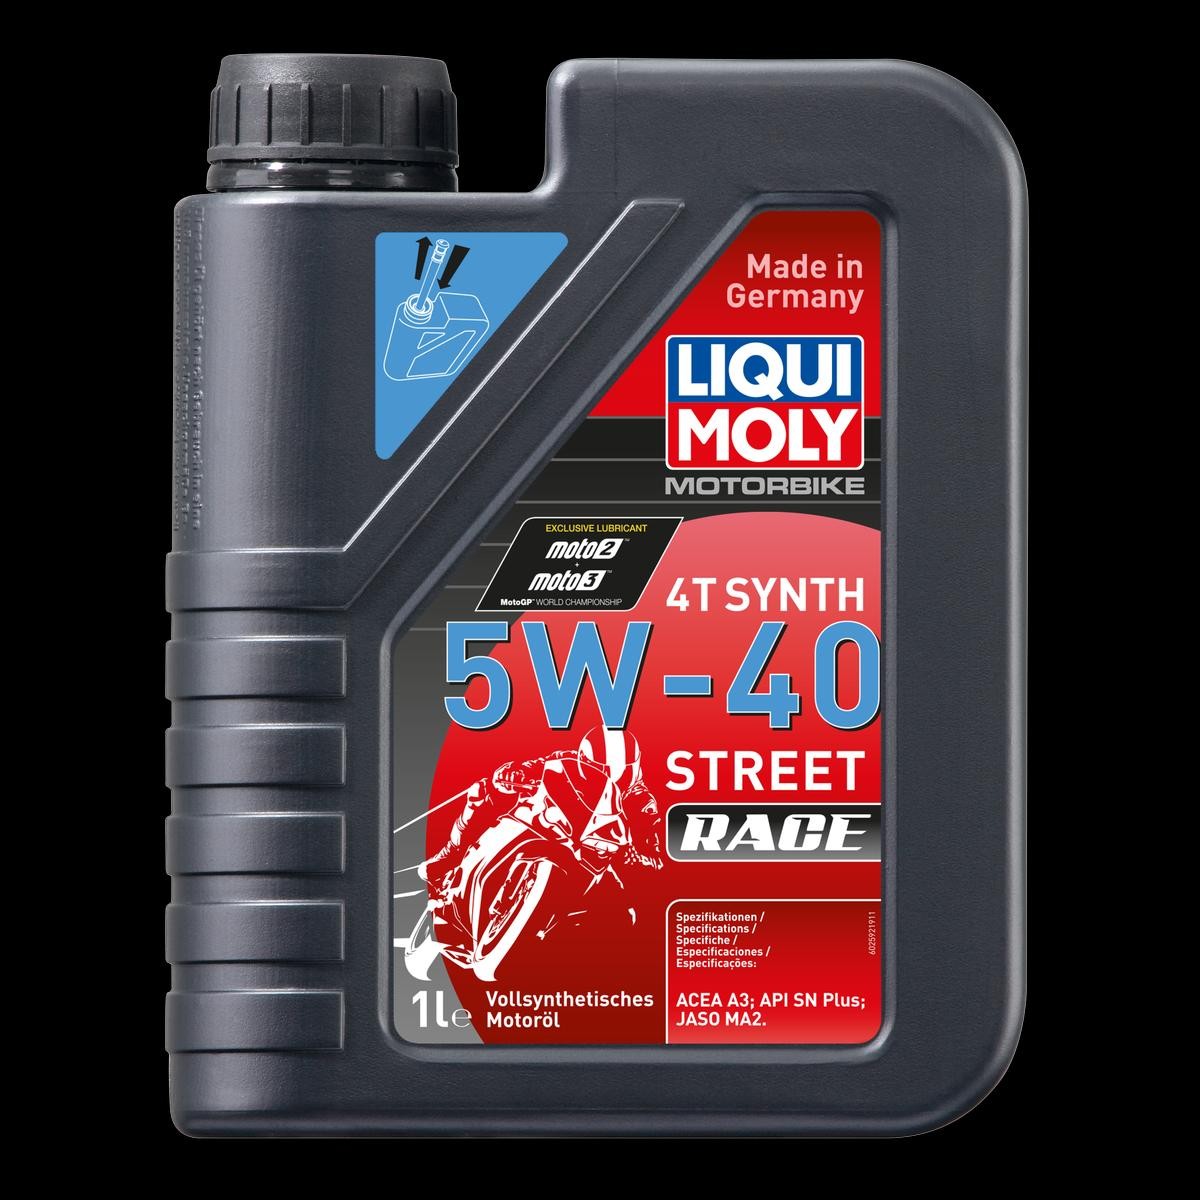 Engine Oil LIQUI MOLY 2592 ZIP Motorcycle Moped Maxi scooter